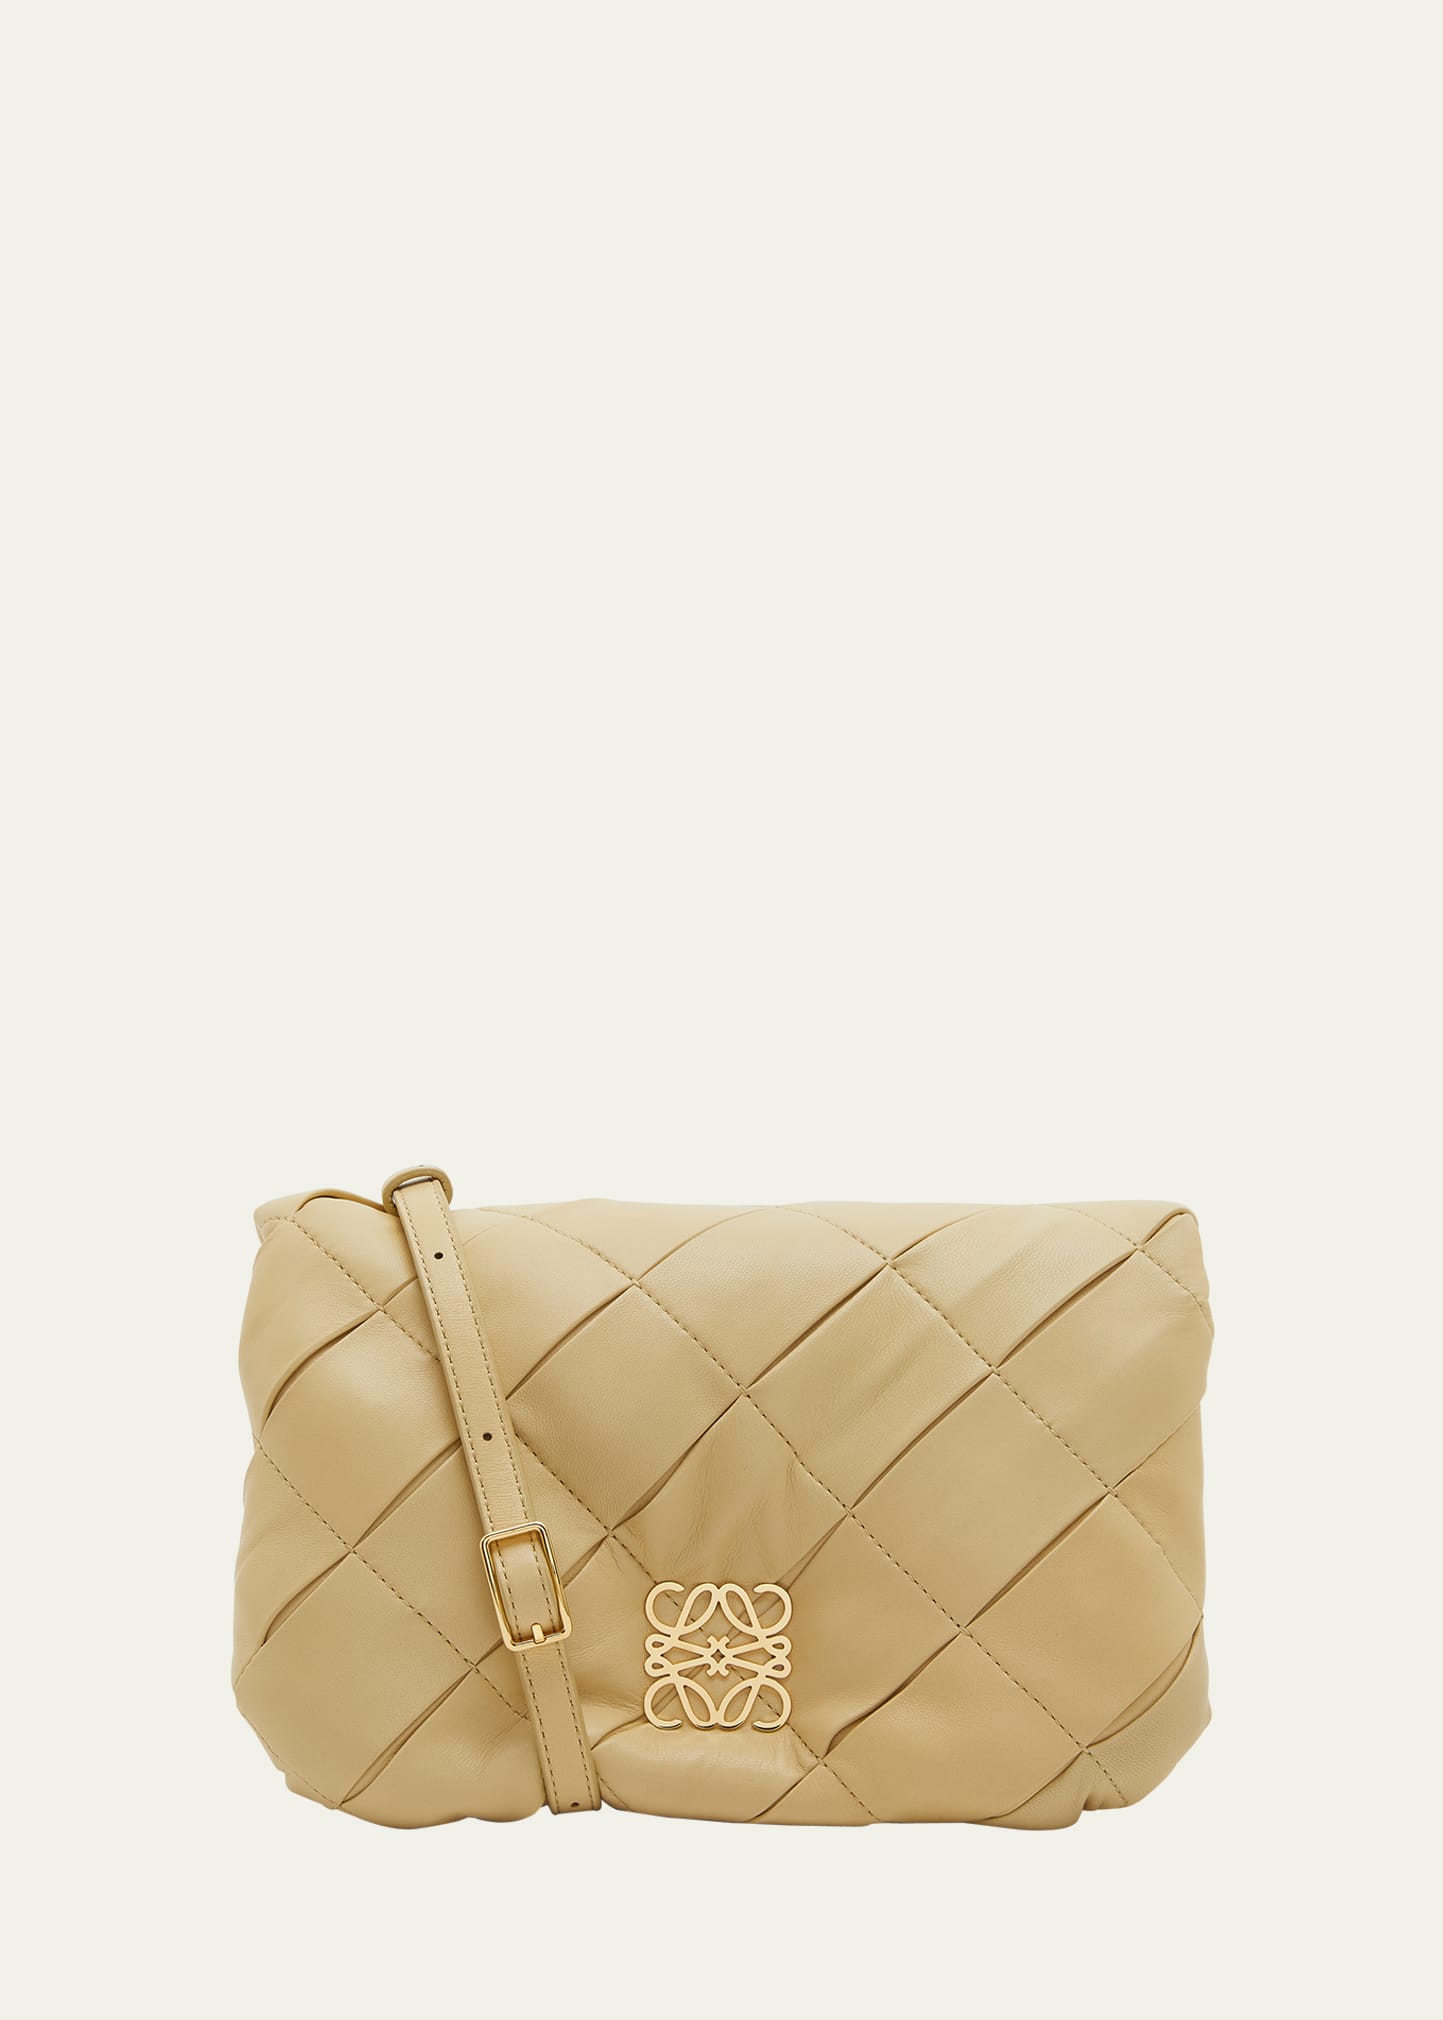 Editor's Pick: Chanel 19 Flap Bag - Daily Front Row